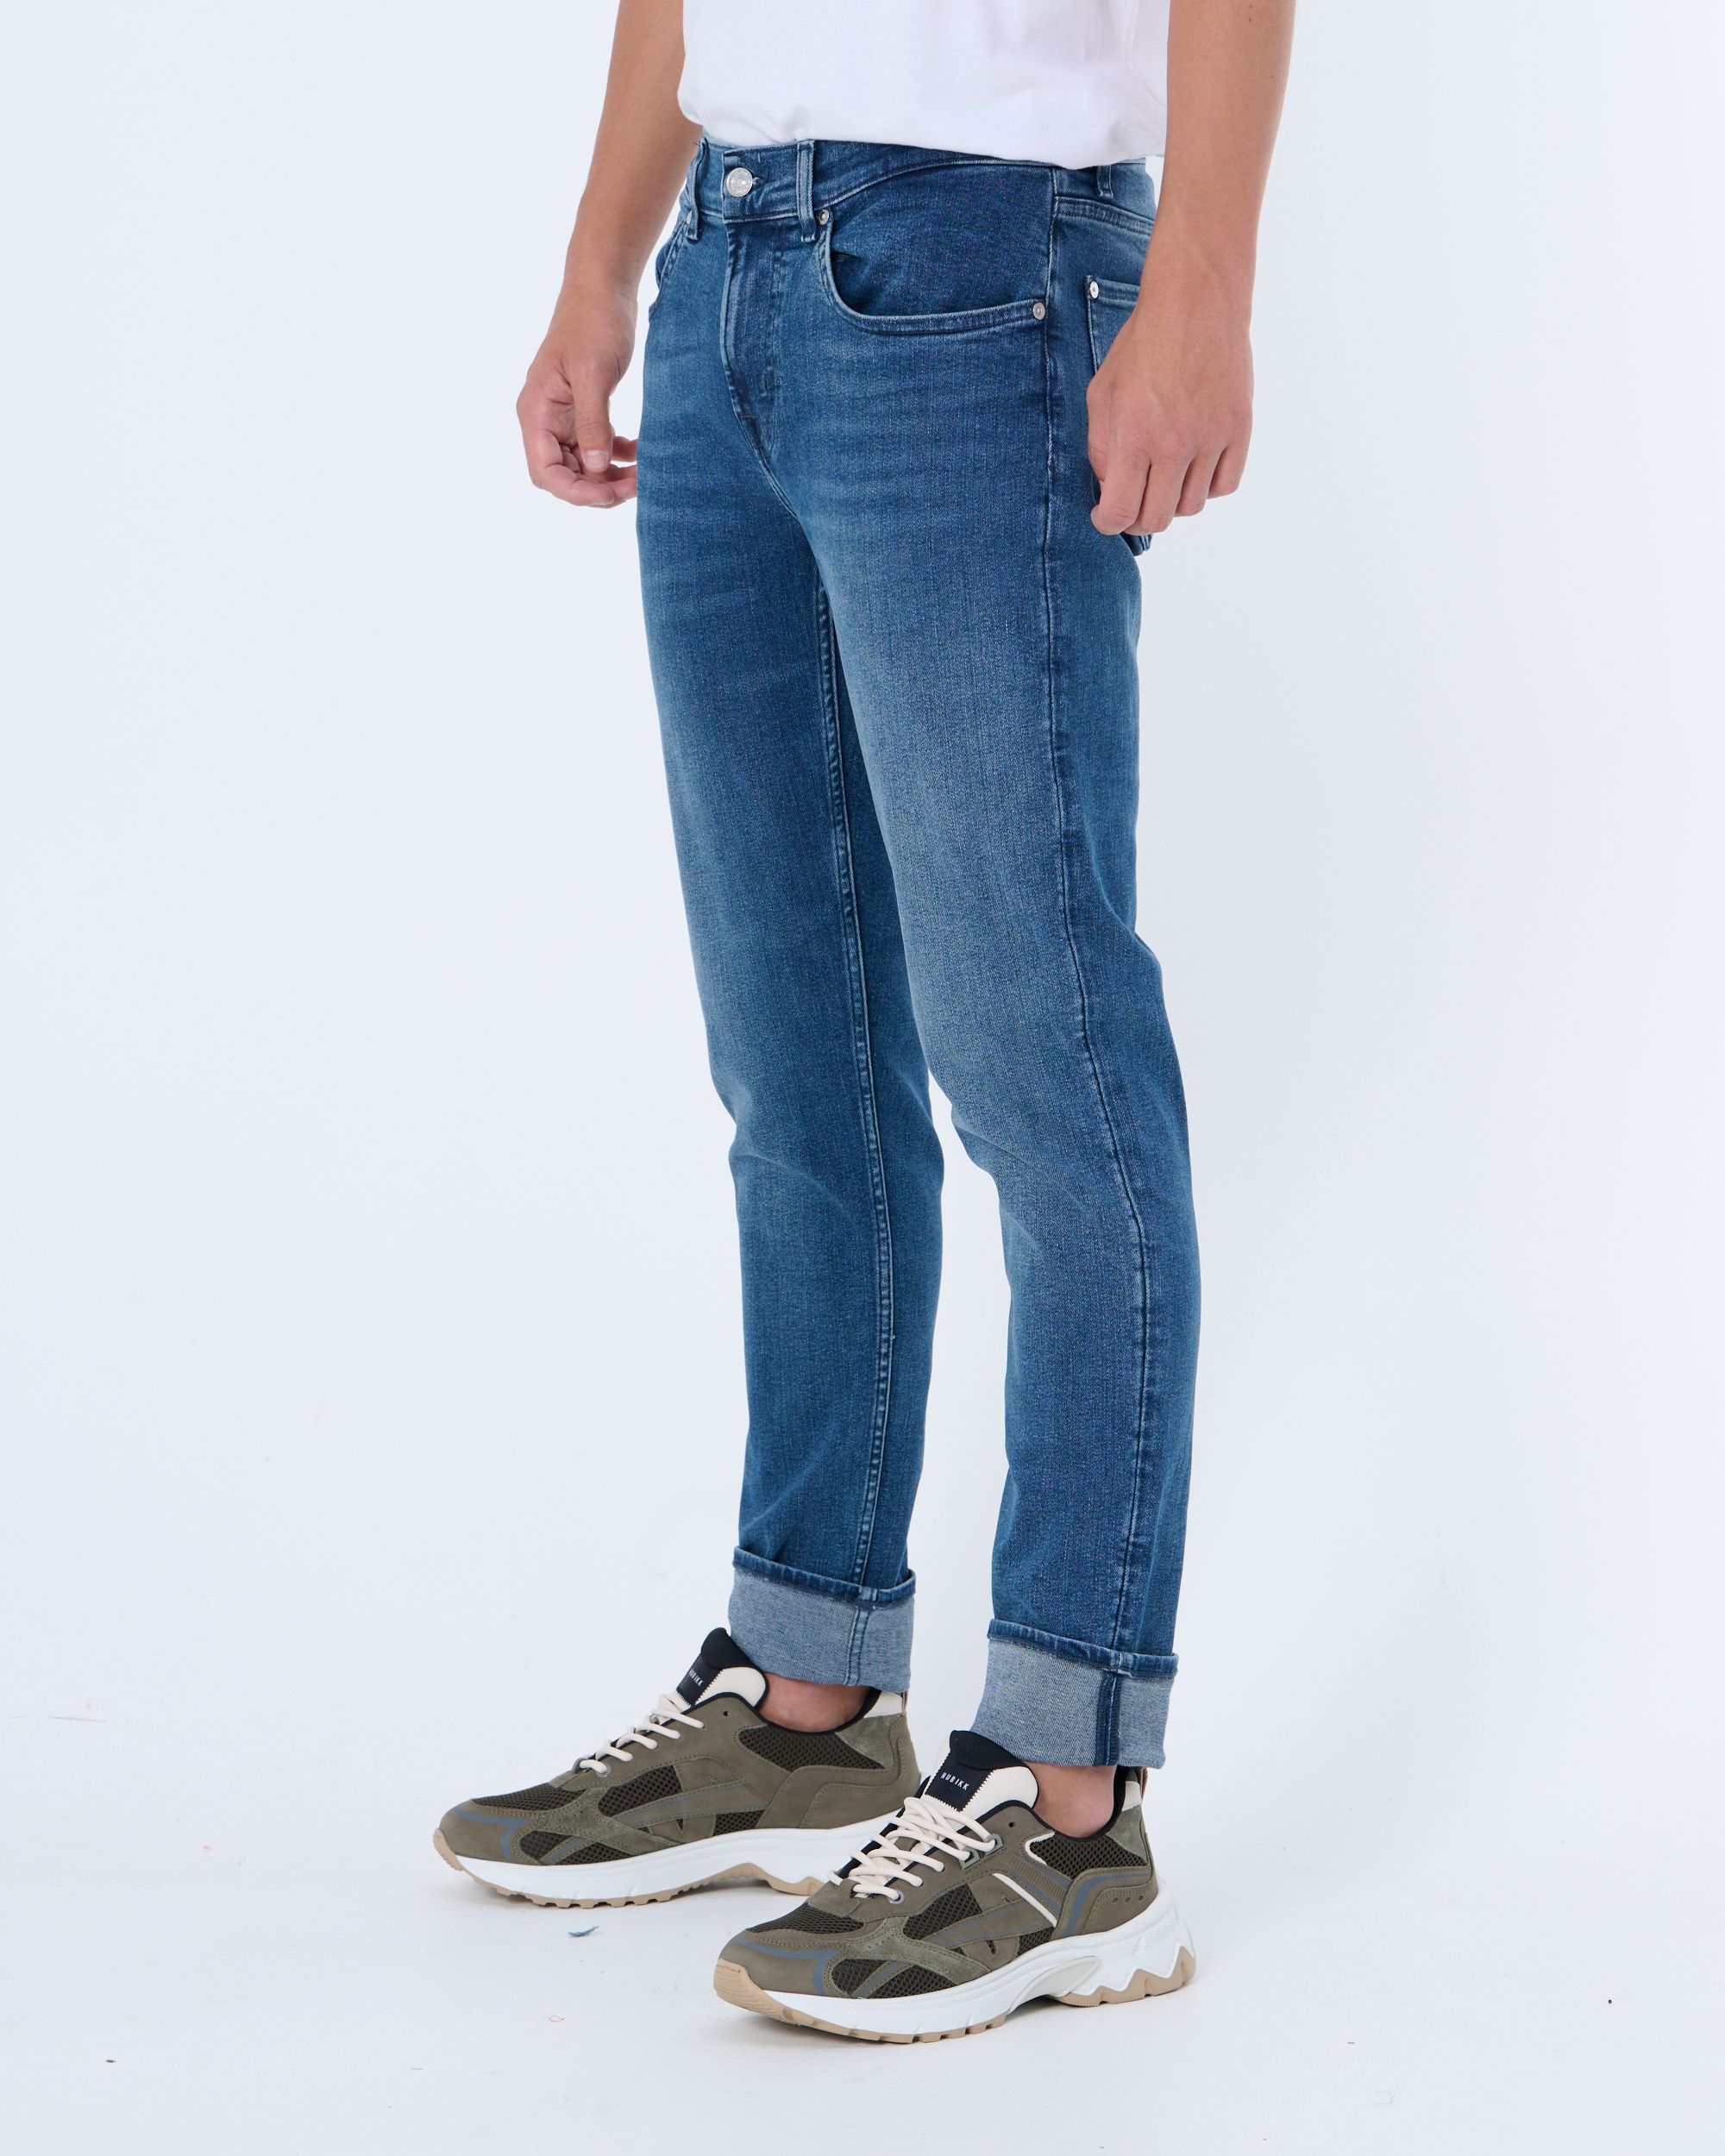 Seven for all mankind Maze Jeans Blauw 089207-001-30